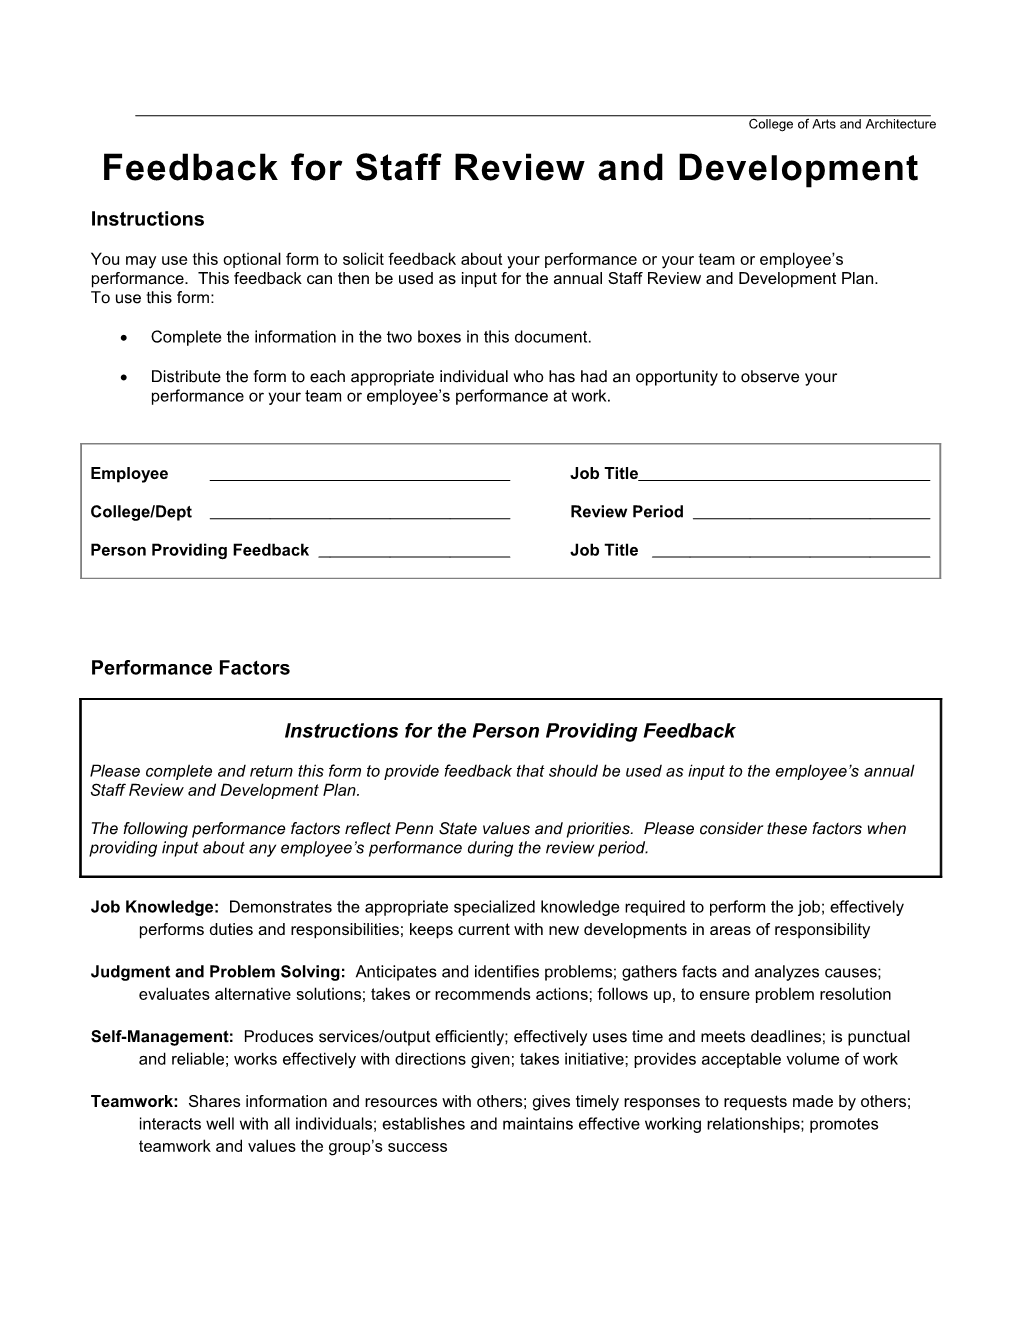 Feedback for Staff Review and Development